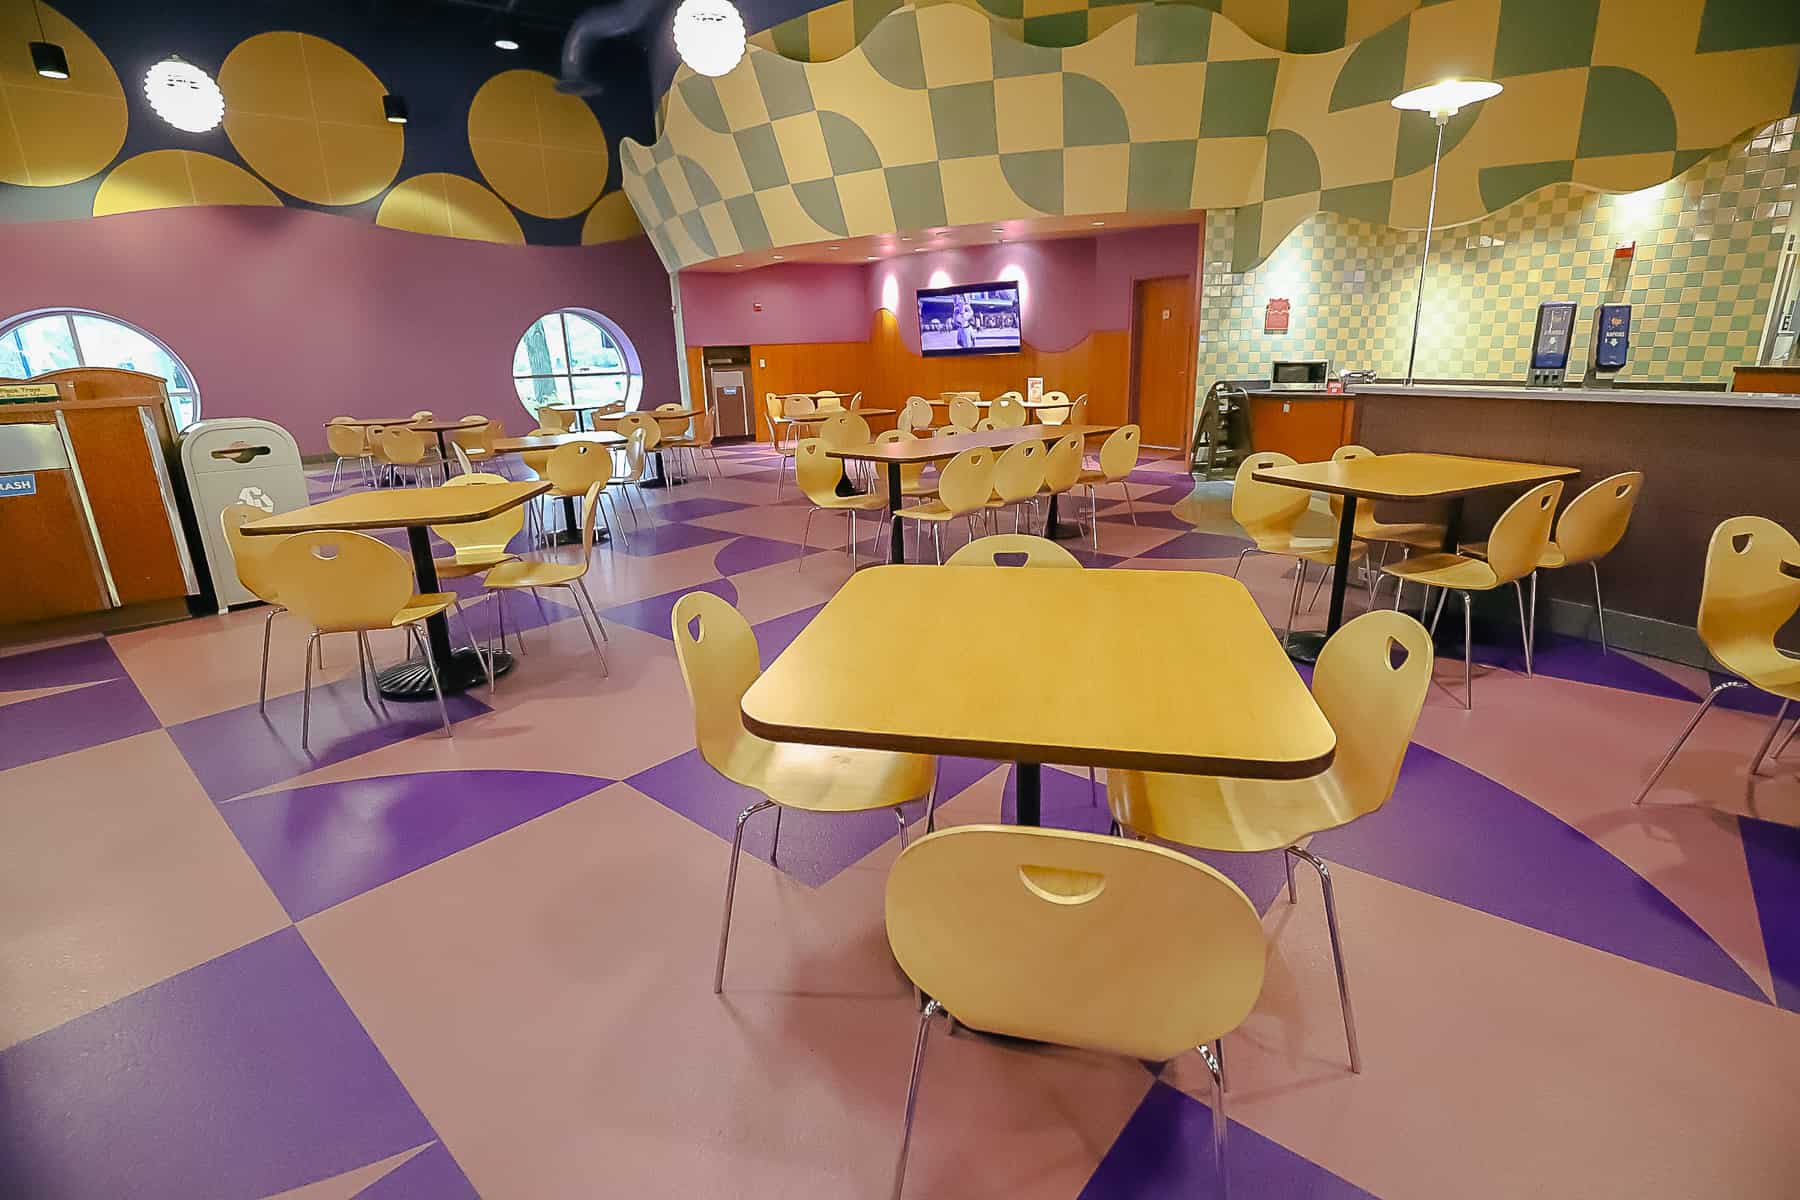 Everything Pop Review (The Food Court at Disney’s Pop Century Resort)